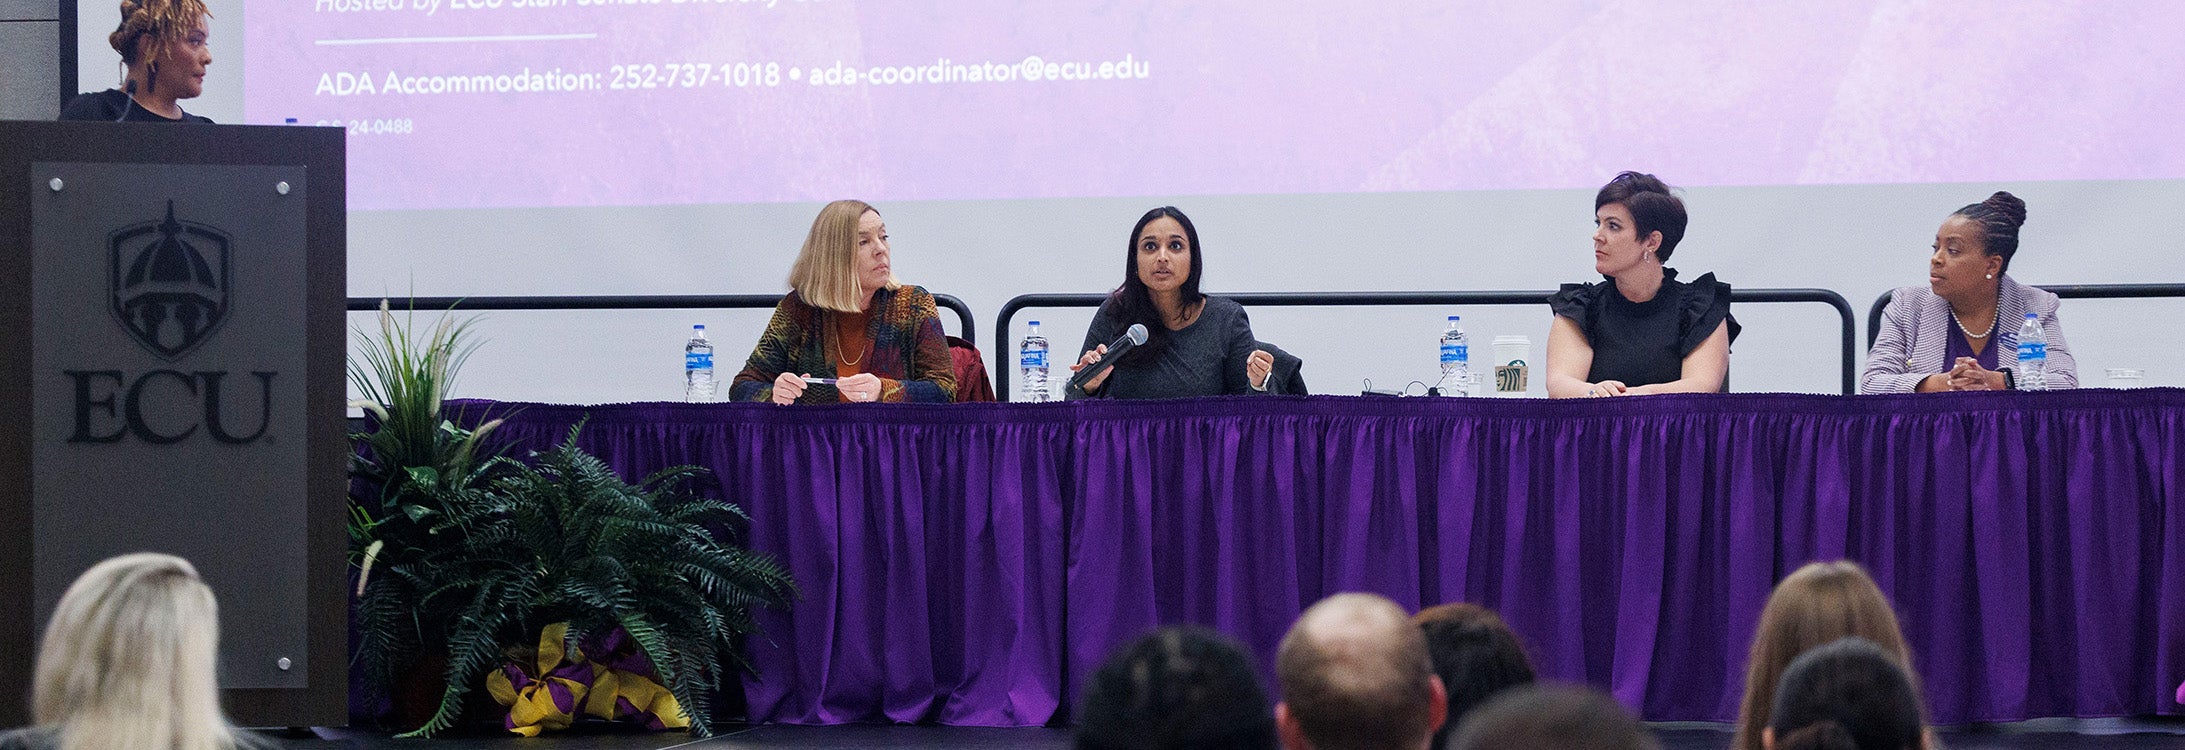 Panelists, including Drs. Bhibha Das and Sharon Ballard, answer an audience question at the Women Leaders at ECU Panel event held March 28. (Photos by Rhett Butler)